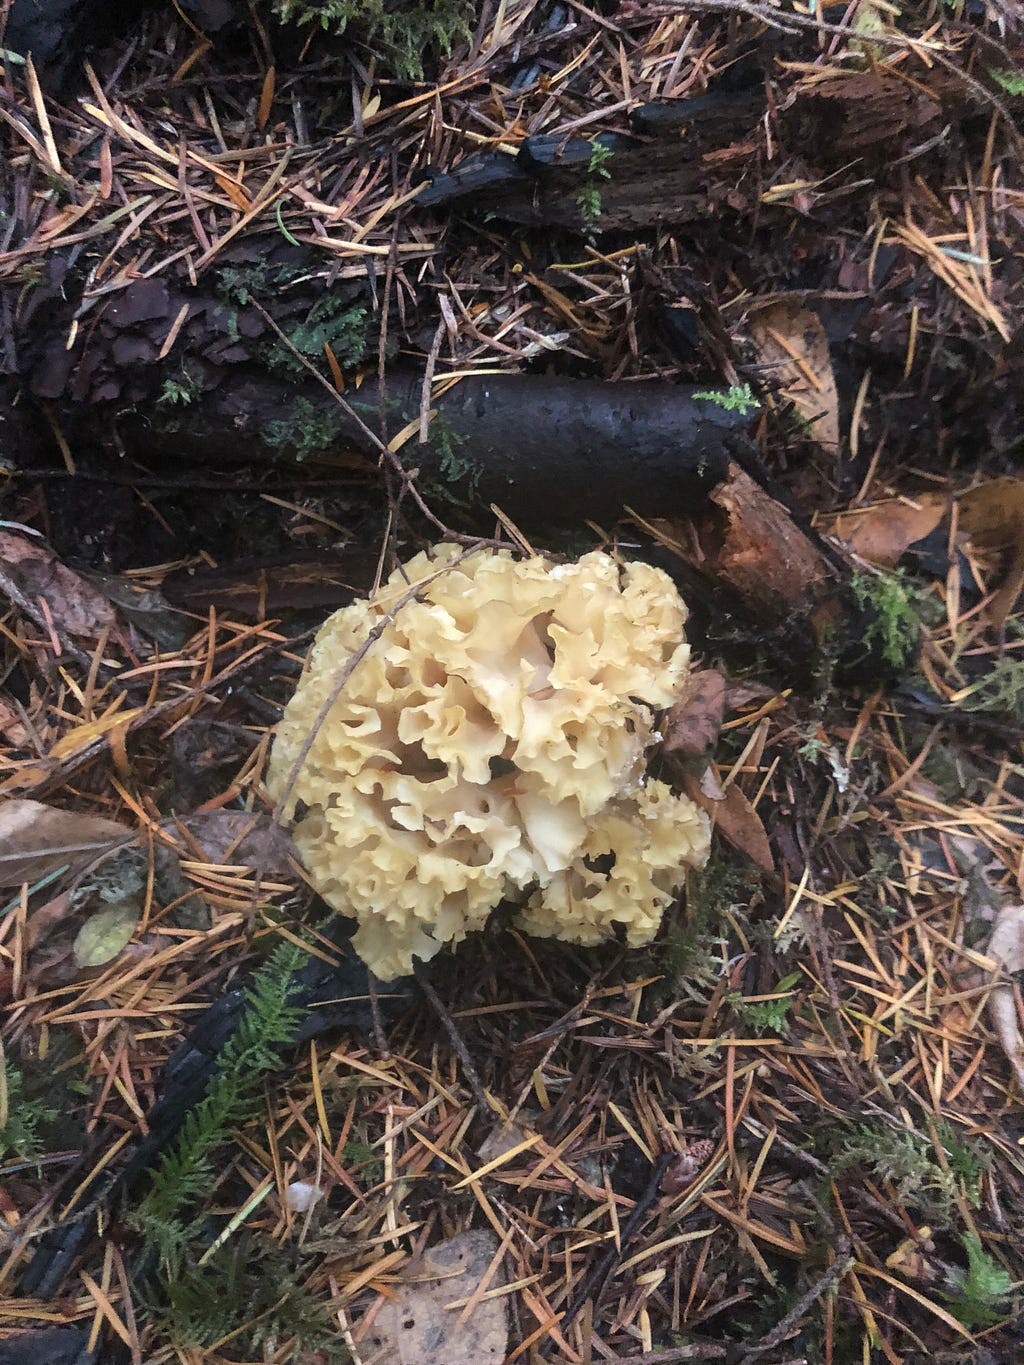 Forest floor with a large cauliflower mushroom in center.